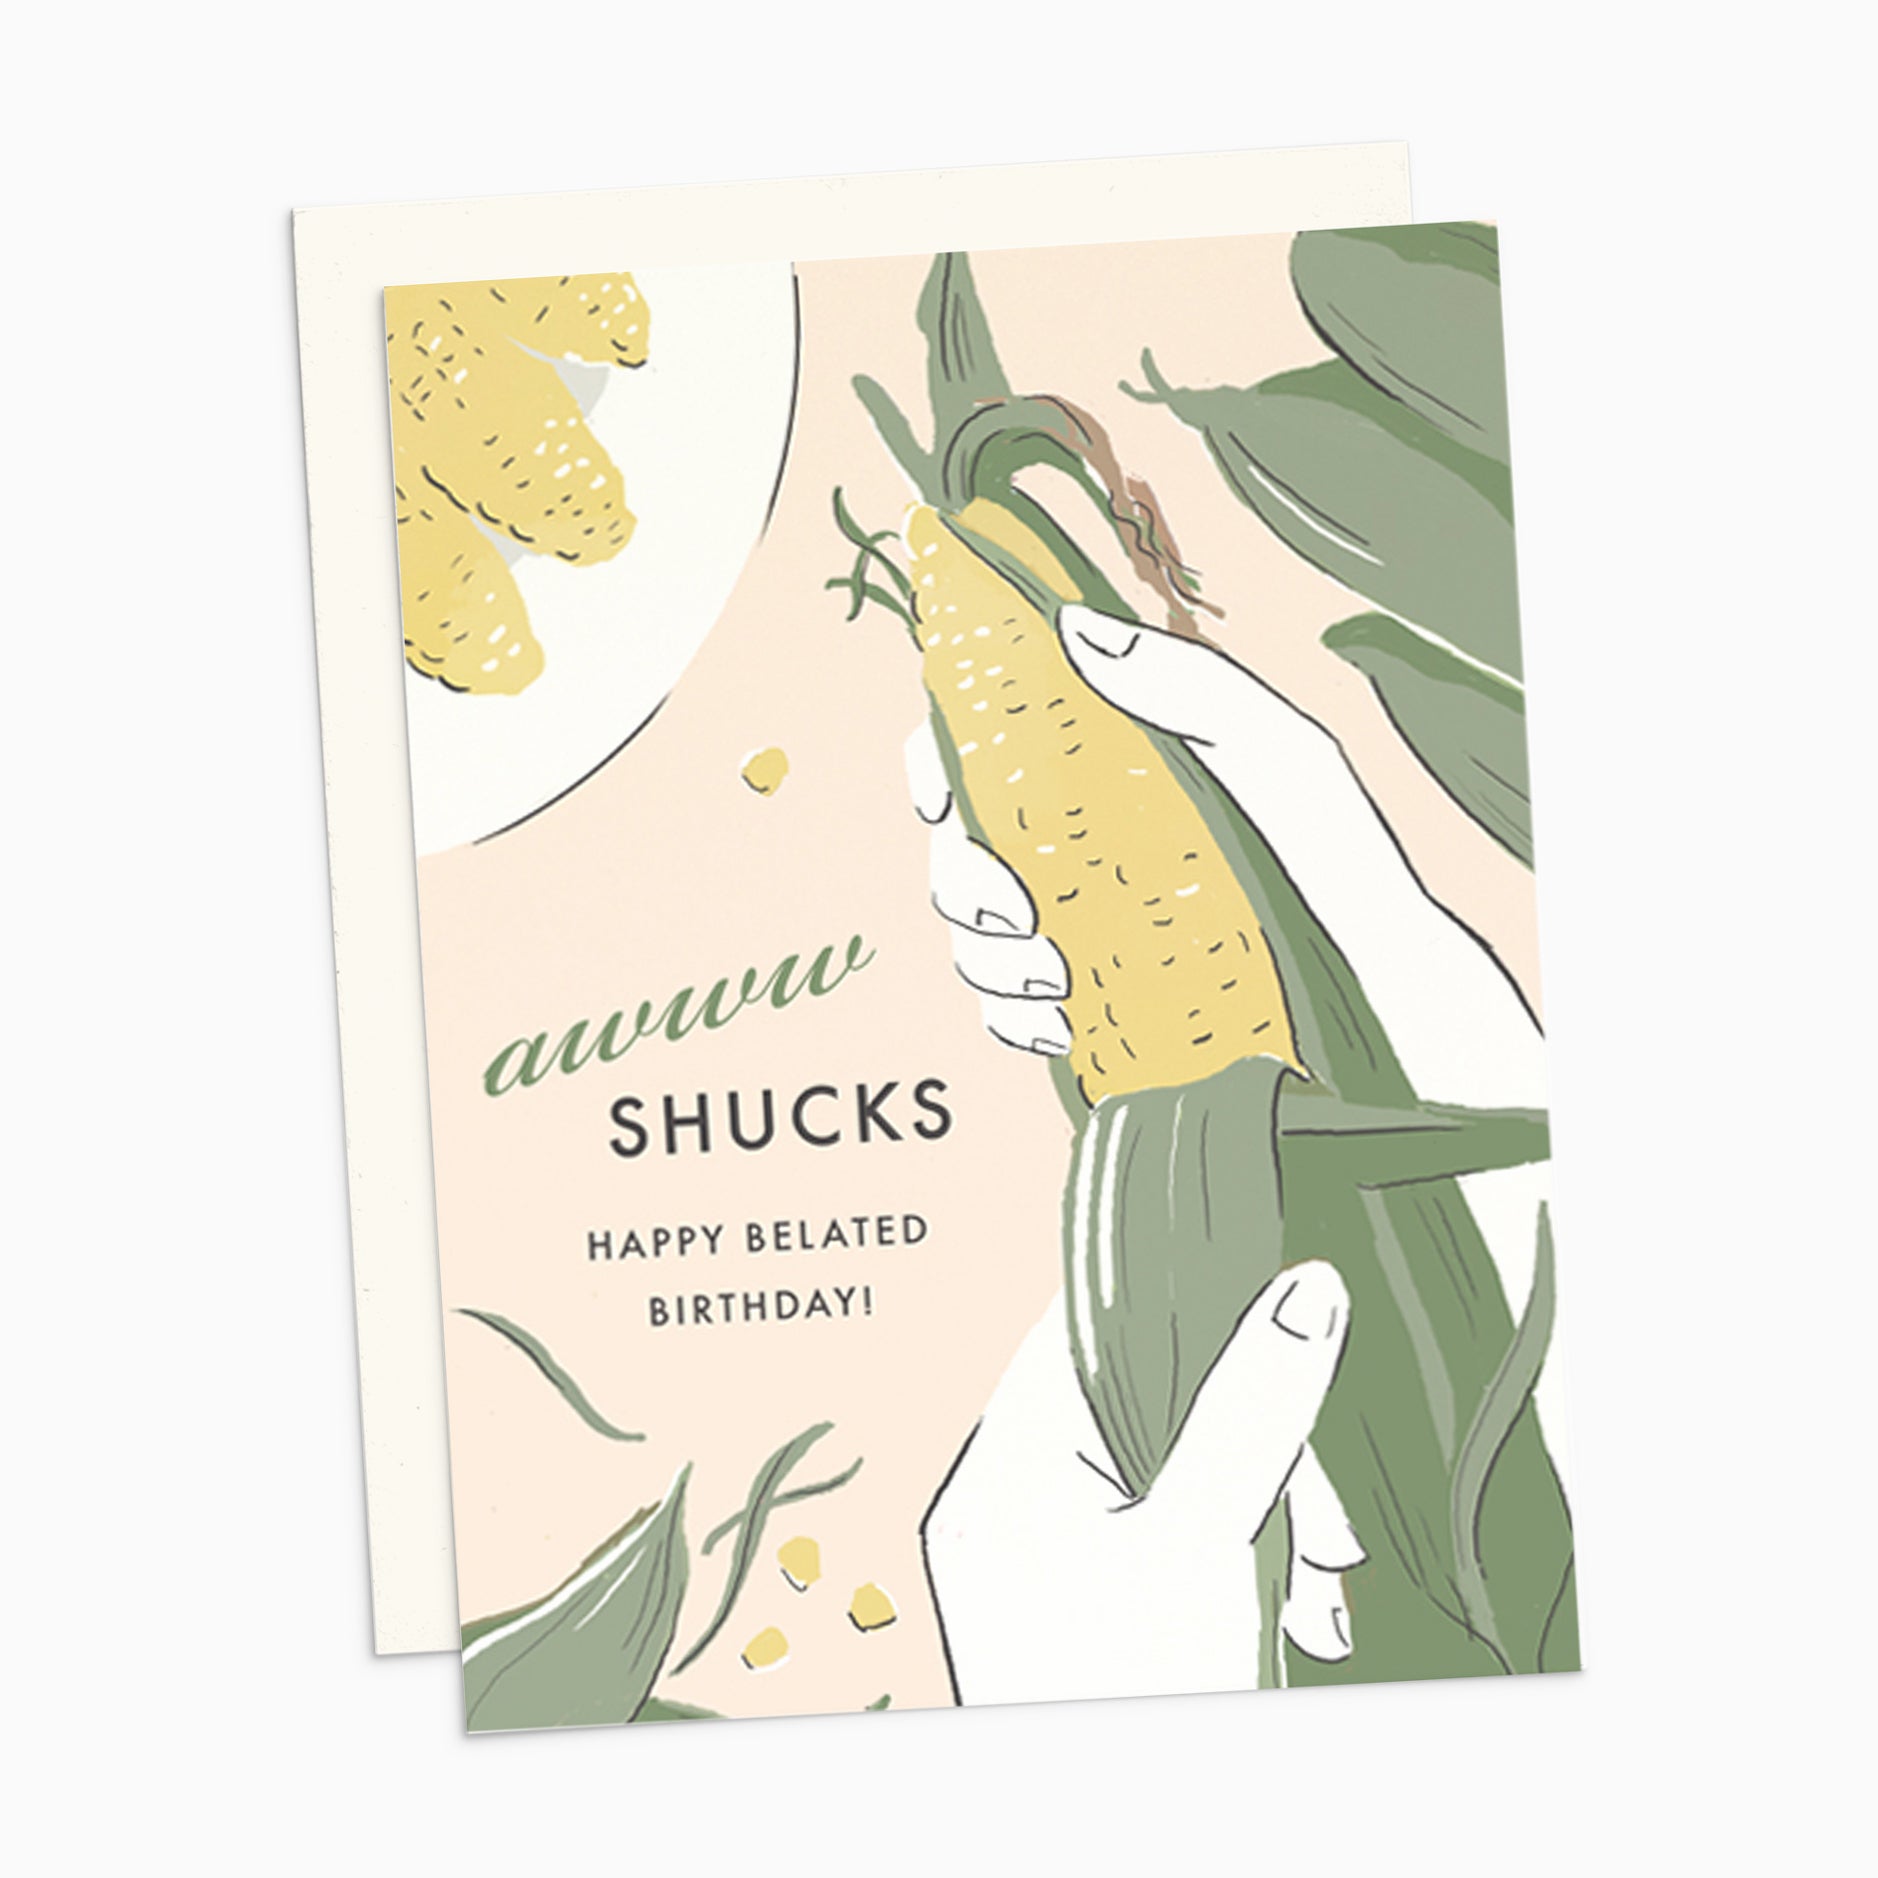 A charming illustrated belated birthday card on premium warm white cardstock, featuring a punny text that reads 'awww shucks, happy belated birthday' alongside a whimsical corn cob being shucked.